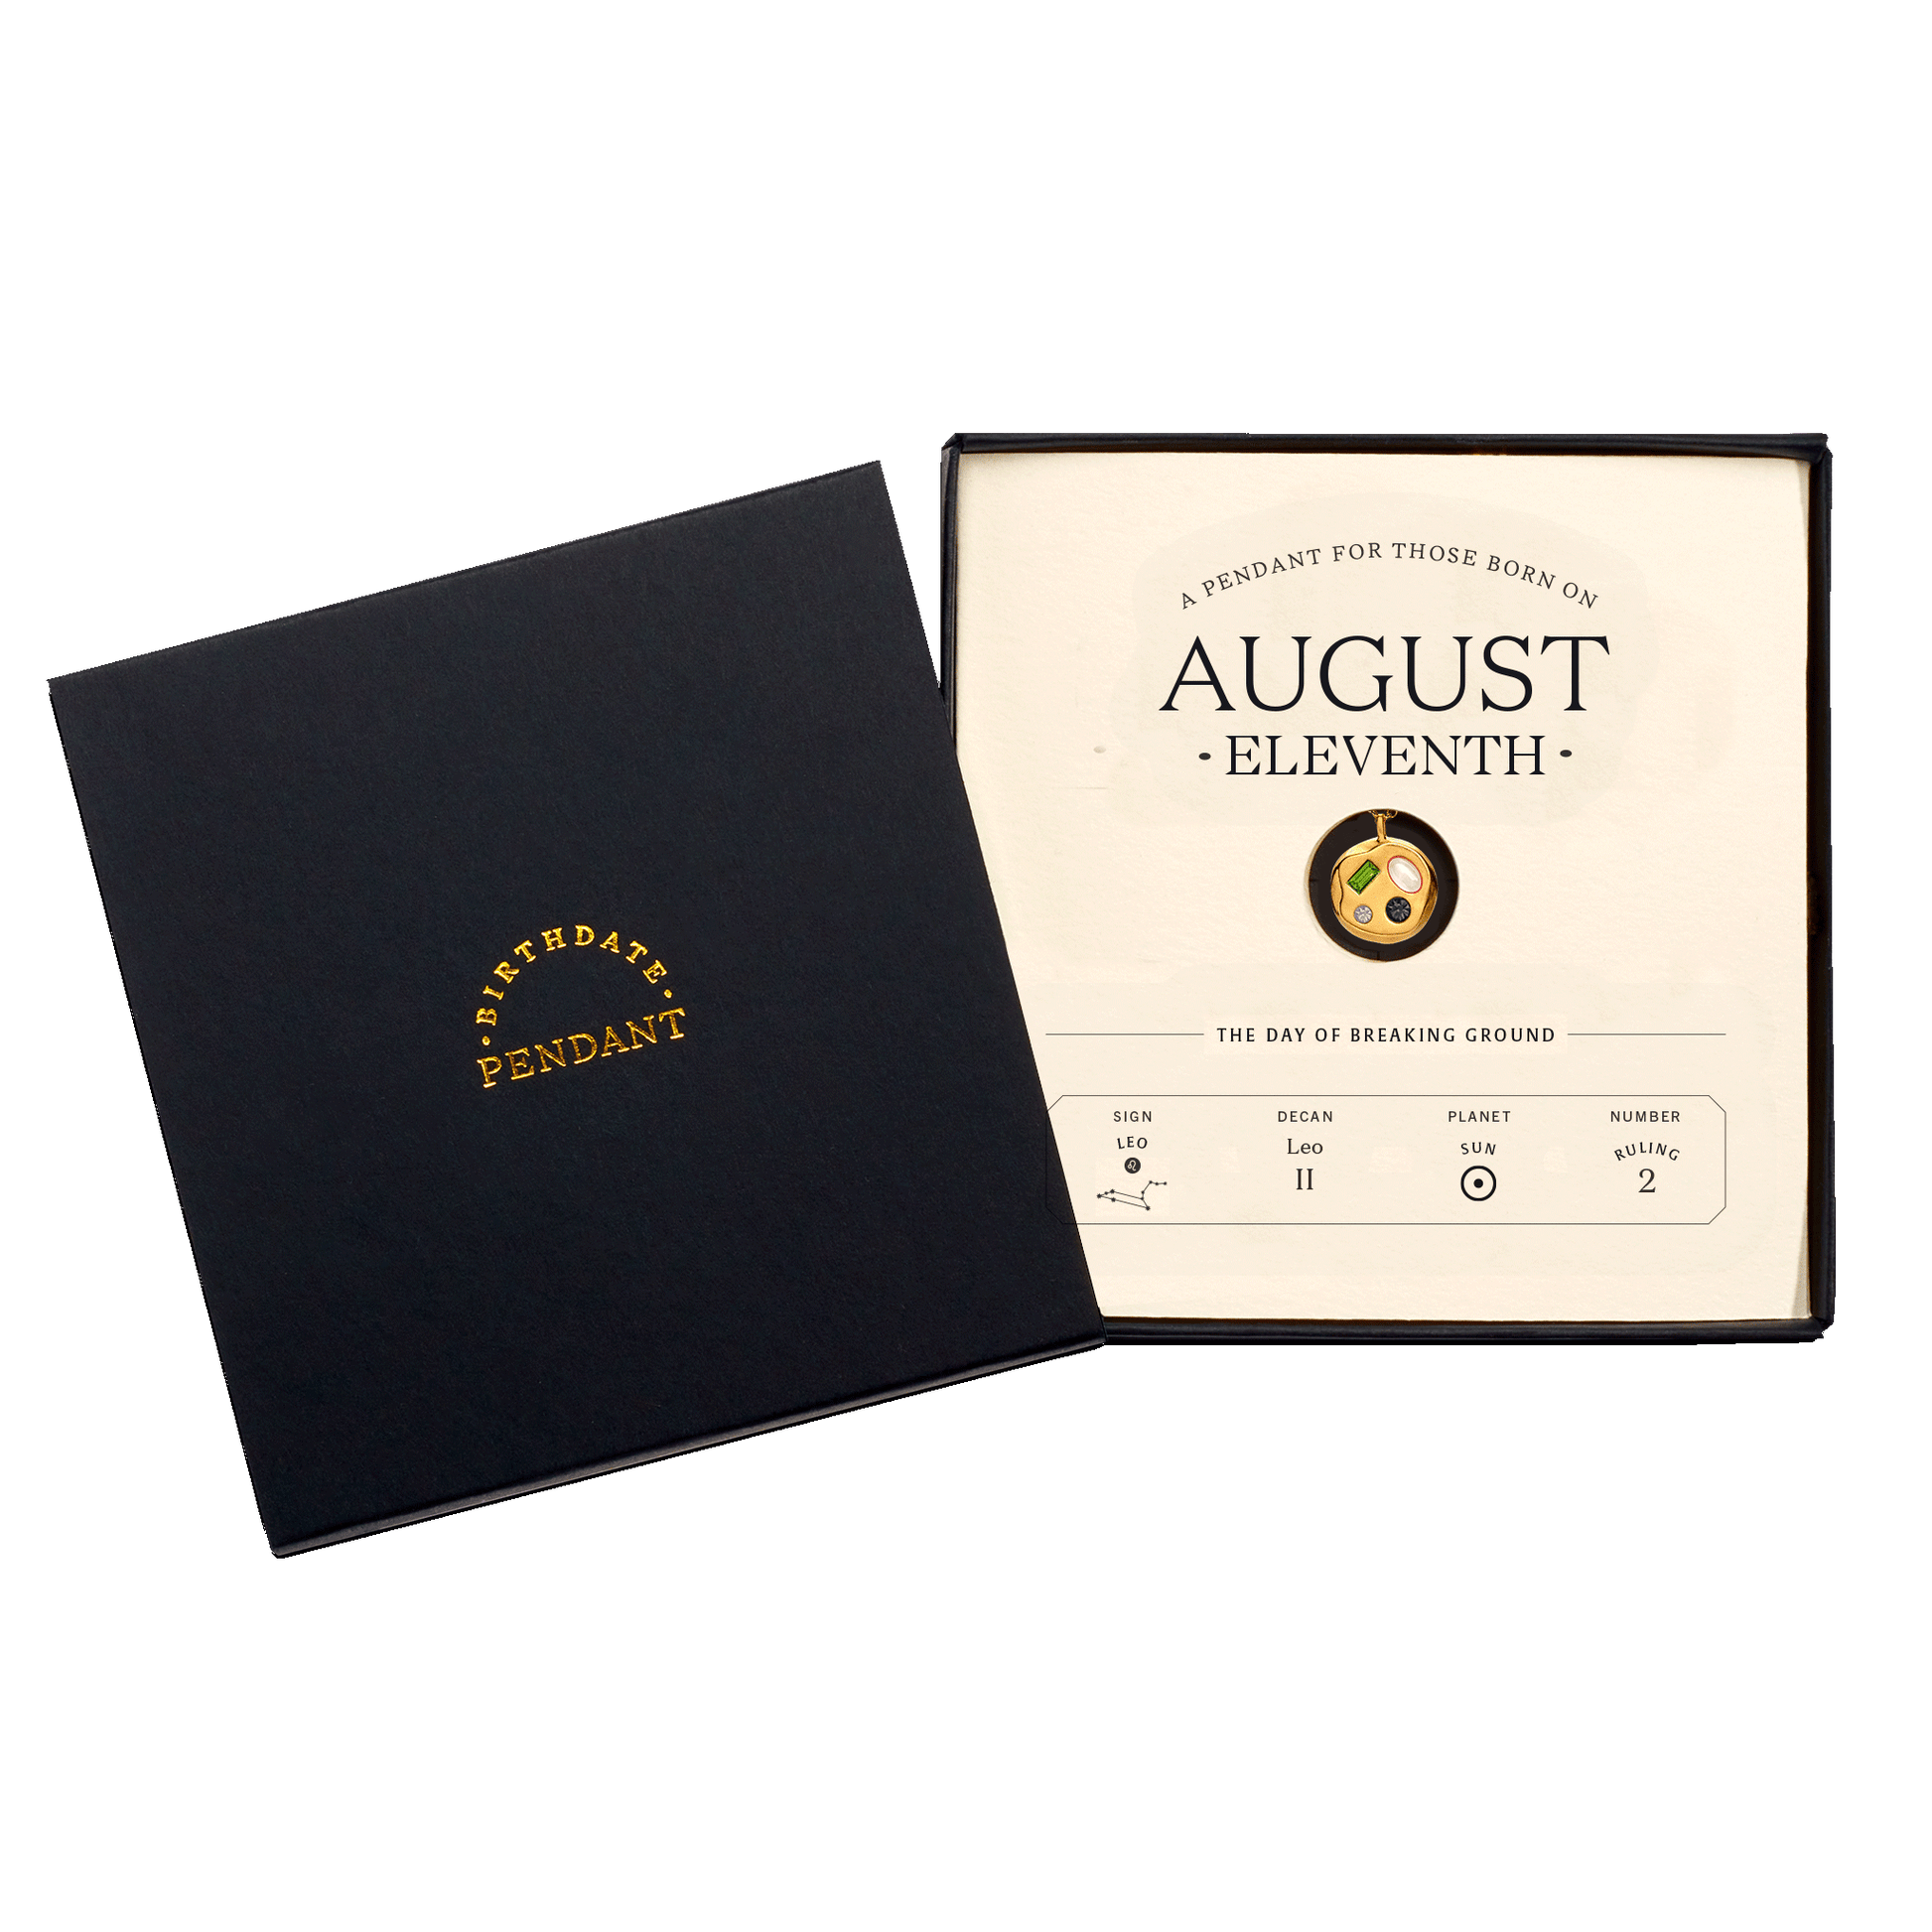 The August Eleventh Pendant inside its box